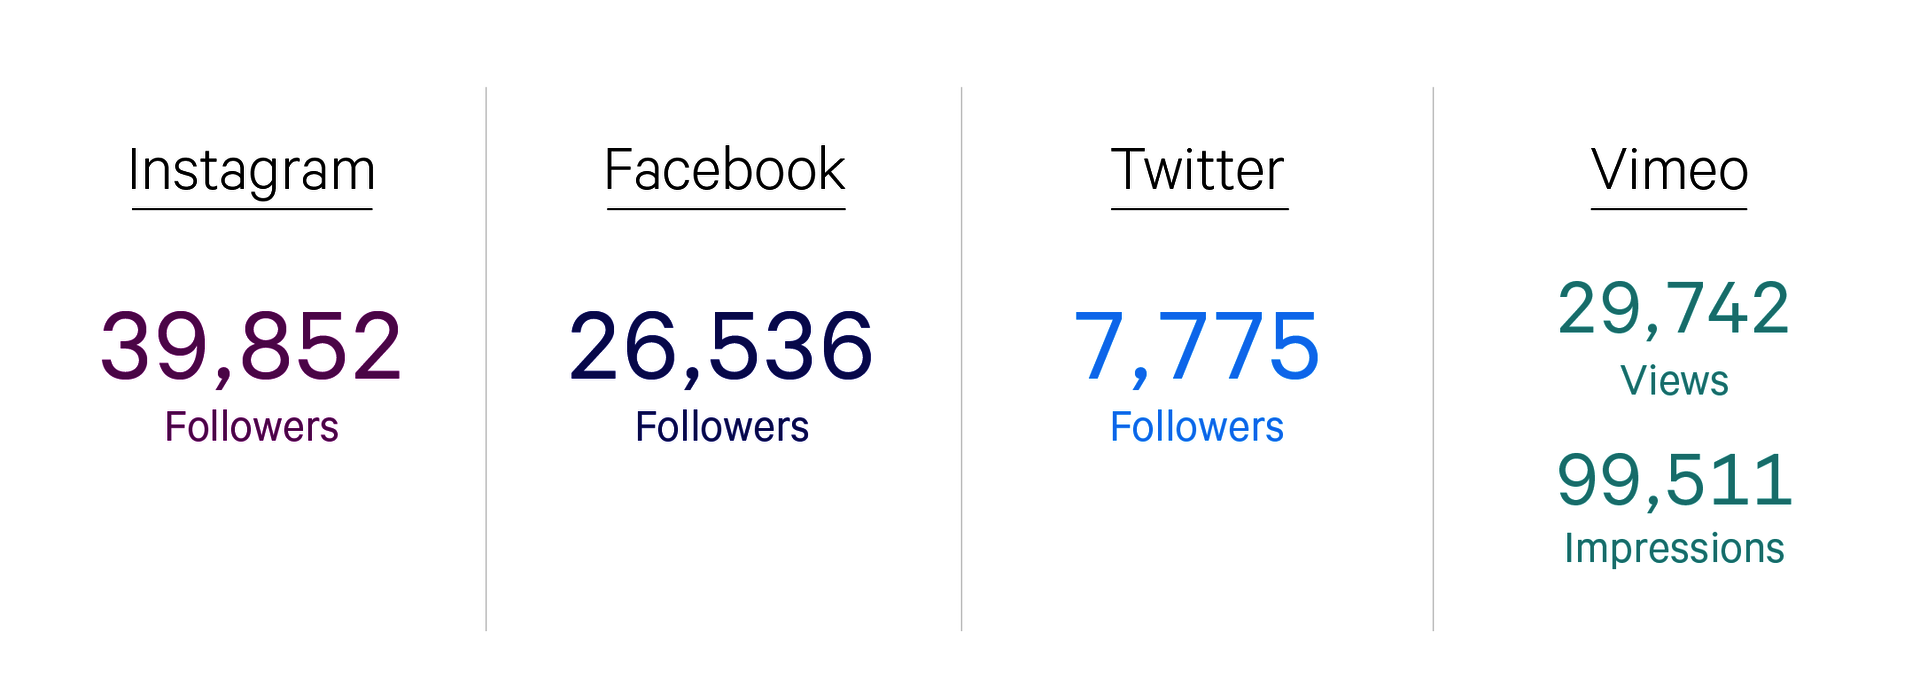 A chart showing that the RISD museum has 39852 instagram followers, 26536 facebook followers, 7775 twitter followers, and 29742 views and 99511 impressions on vimeo.